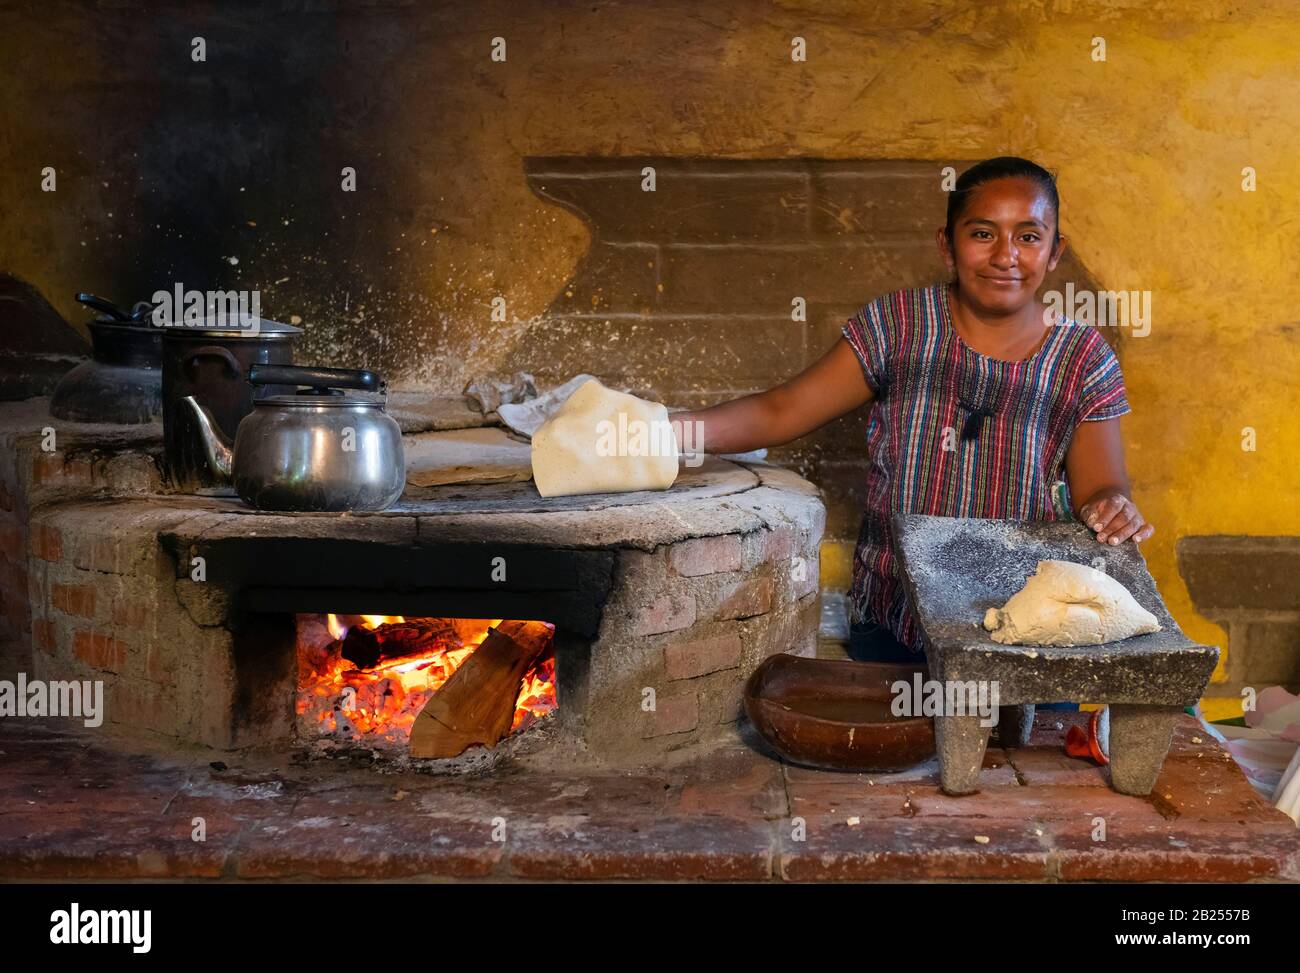 Smiling indigenous mexican woman with corn tortilla pancake making the traditional Tlayuda dish in colorful clothing by a fire, Oaxaca, Mexico. Stock Photo